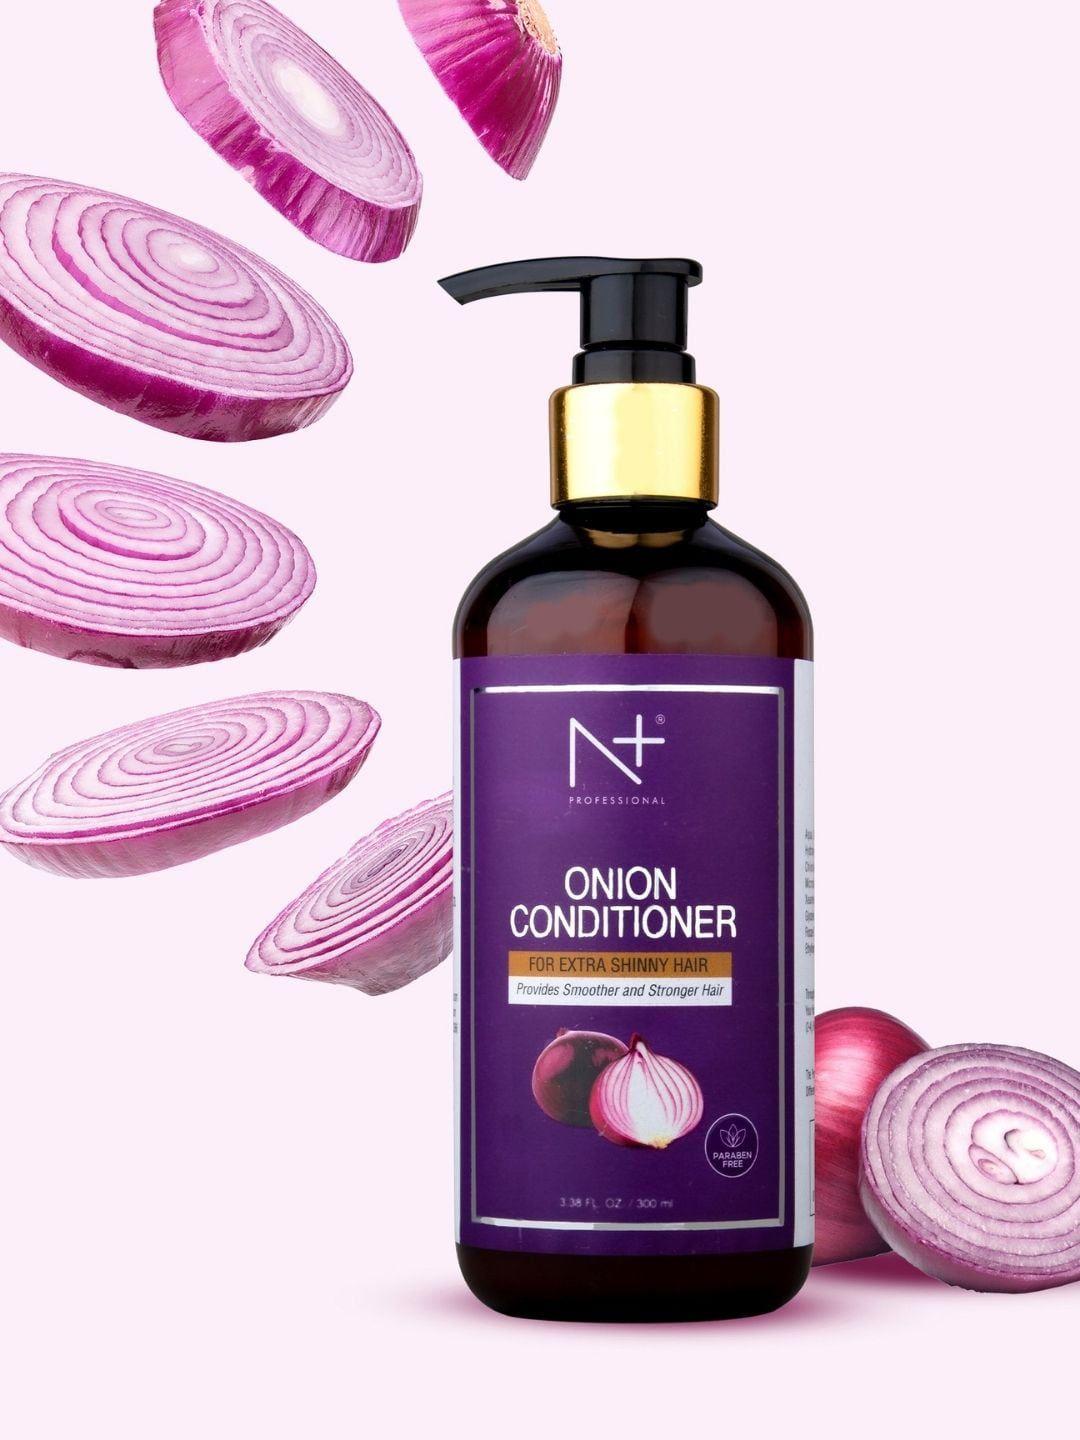 n plus professional onion hair conditioner for extra shiny hair - 300ml